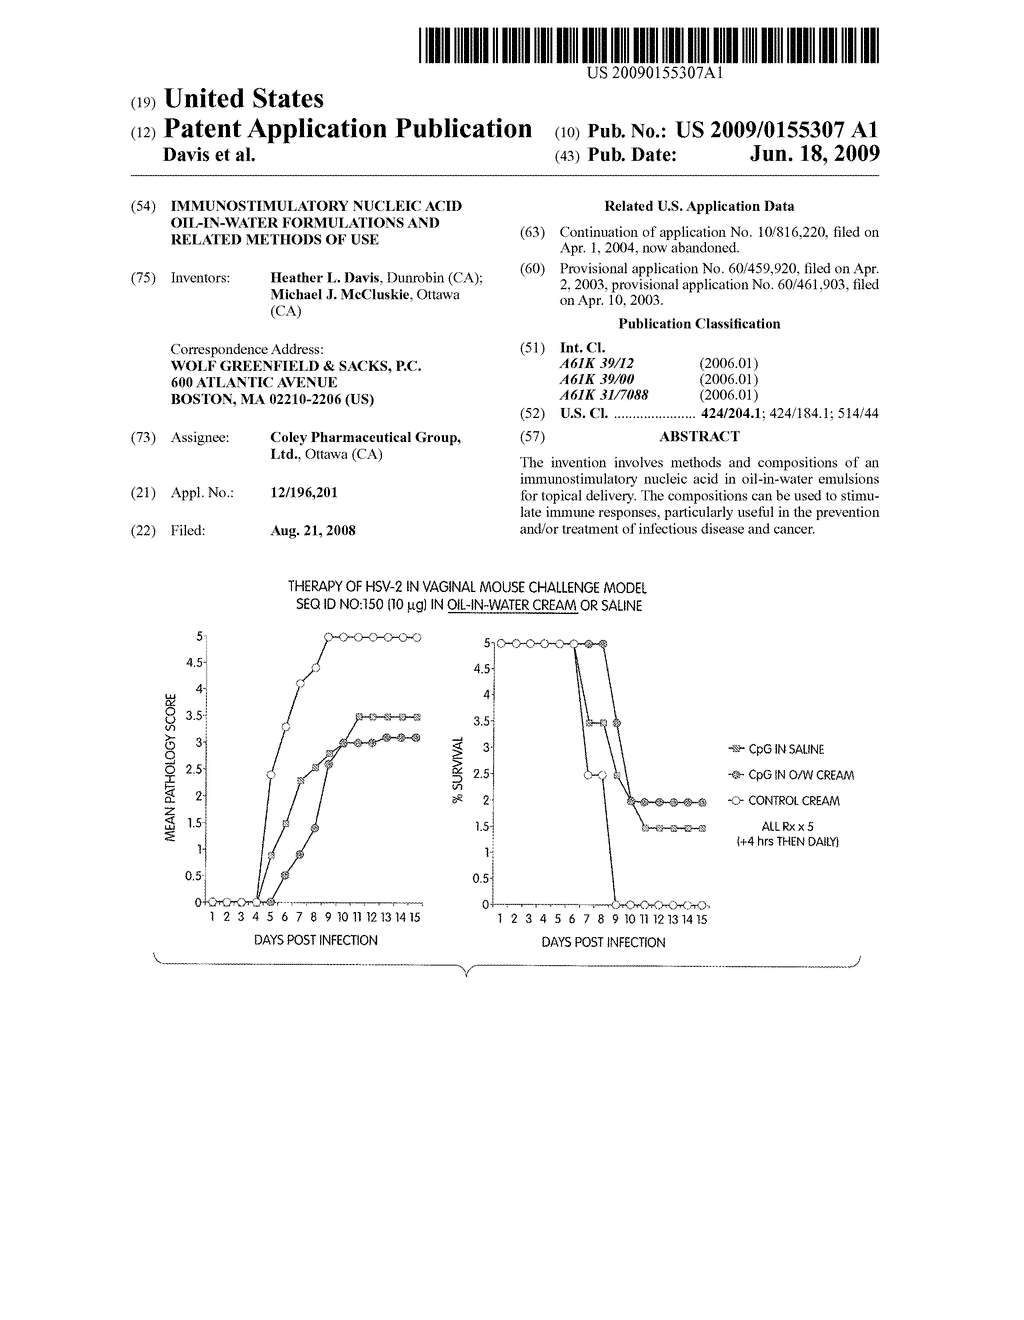 IMMUNOSTIMULATORY NUCLEIC ACID OIL-IN-WATER FORMULATIONS AND RELATED METHODS OF USE - diagram, schematic, and image 01